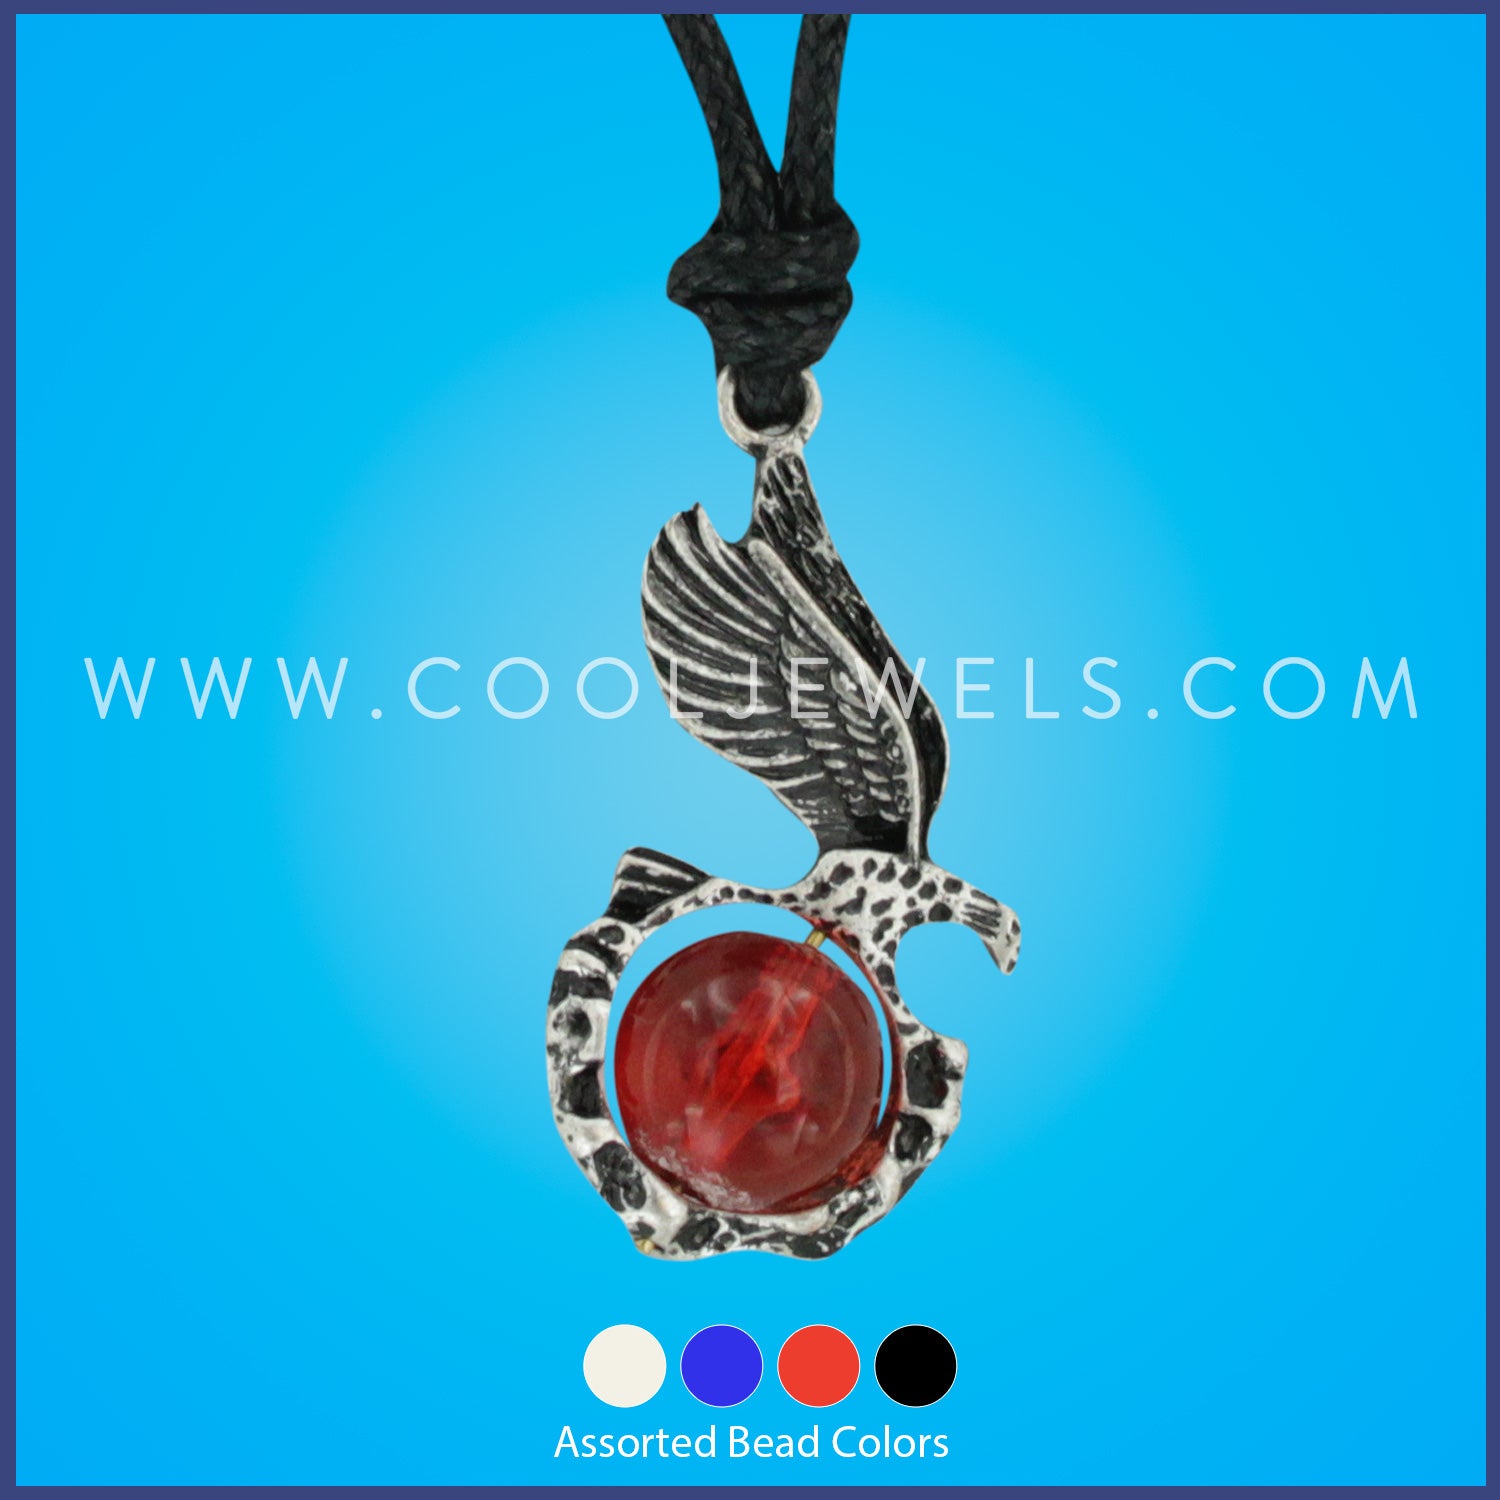 SLIDER CORD NECKLACE WITH EAGLE & GLASS BALL PENDANT - ASSORTED